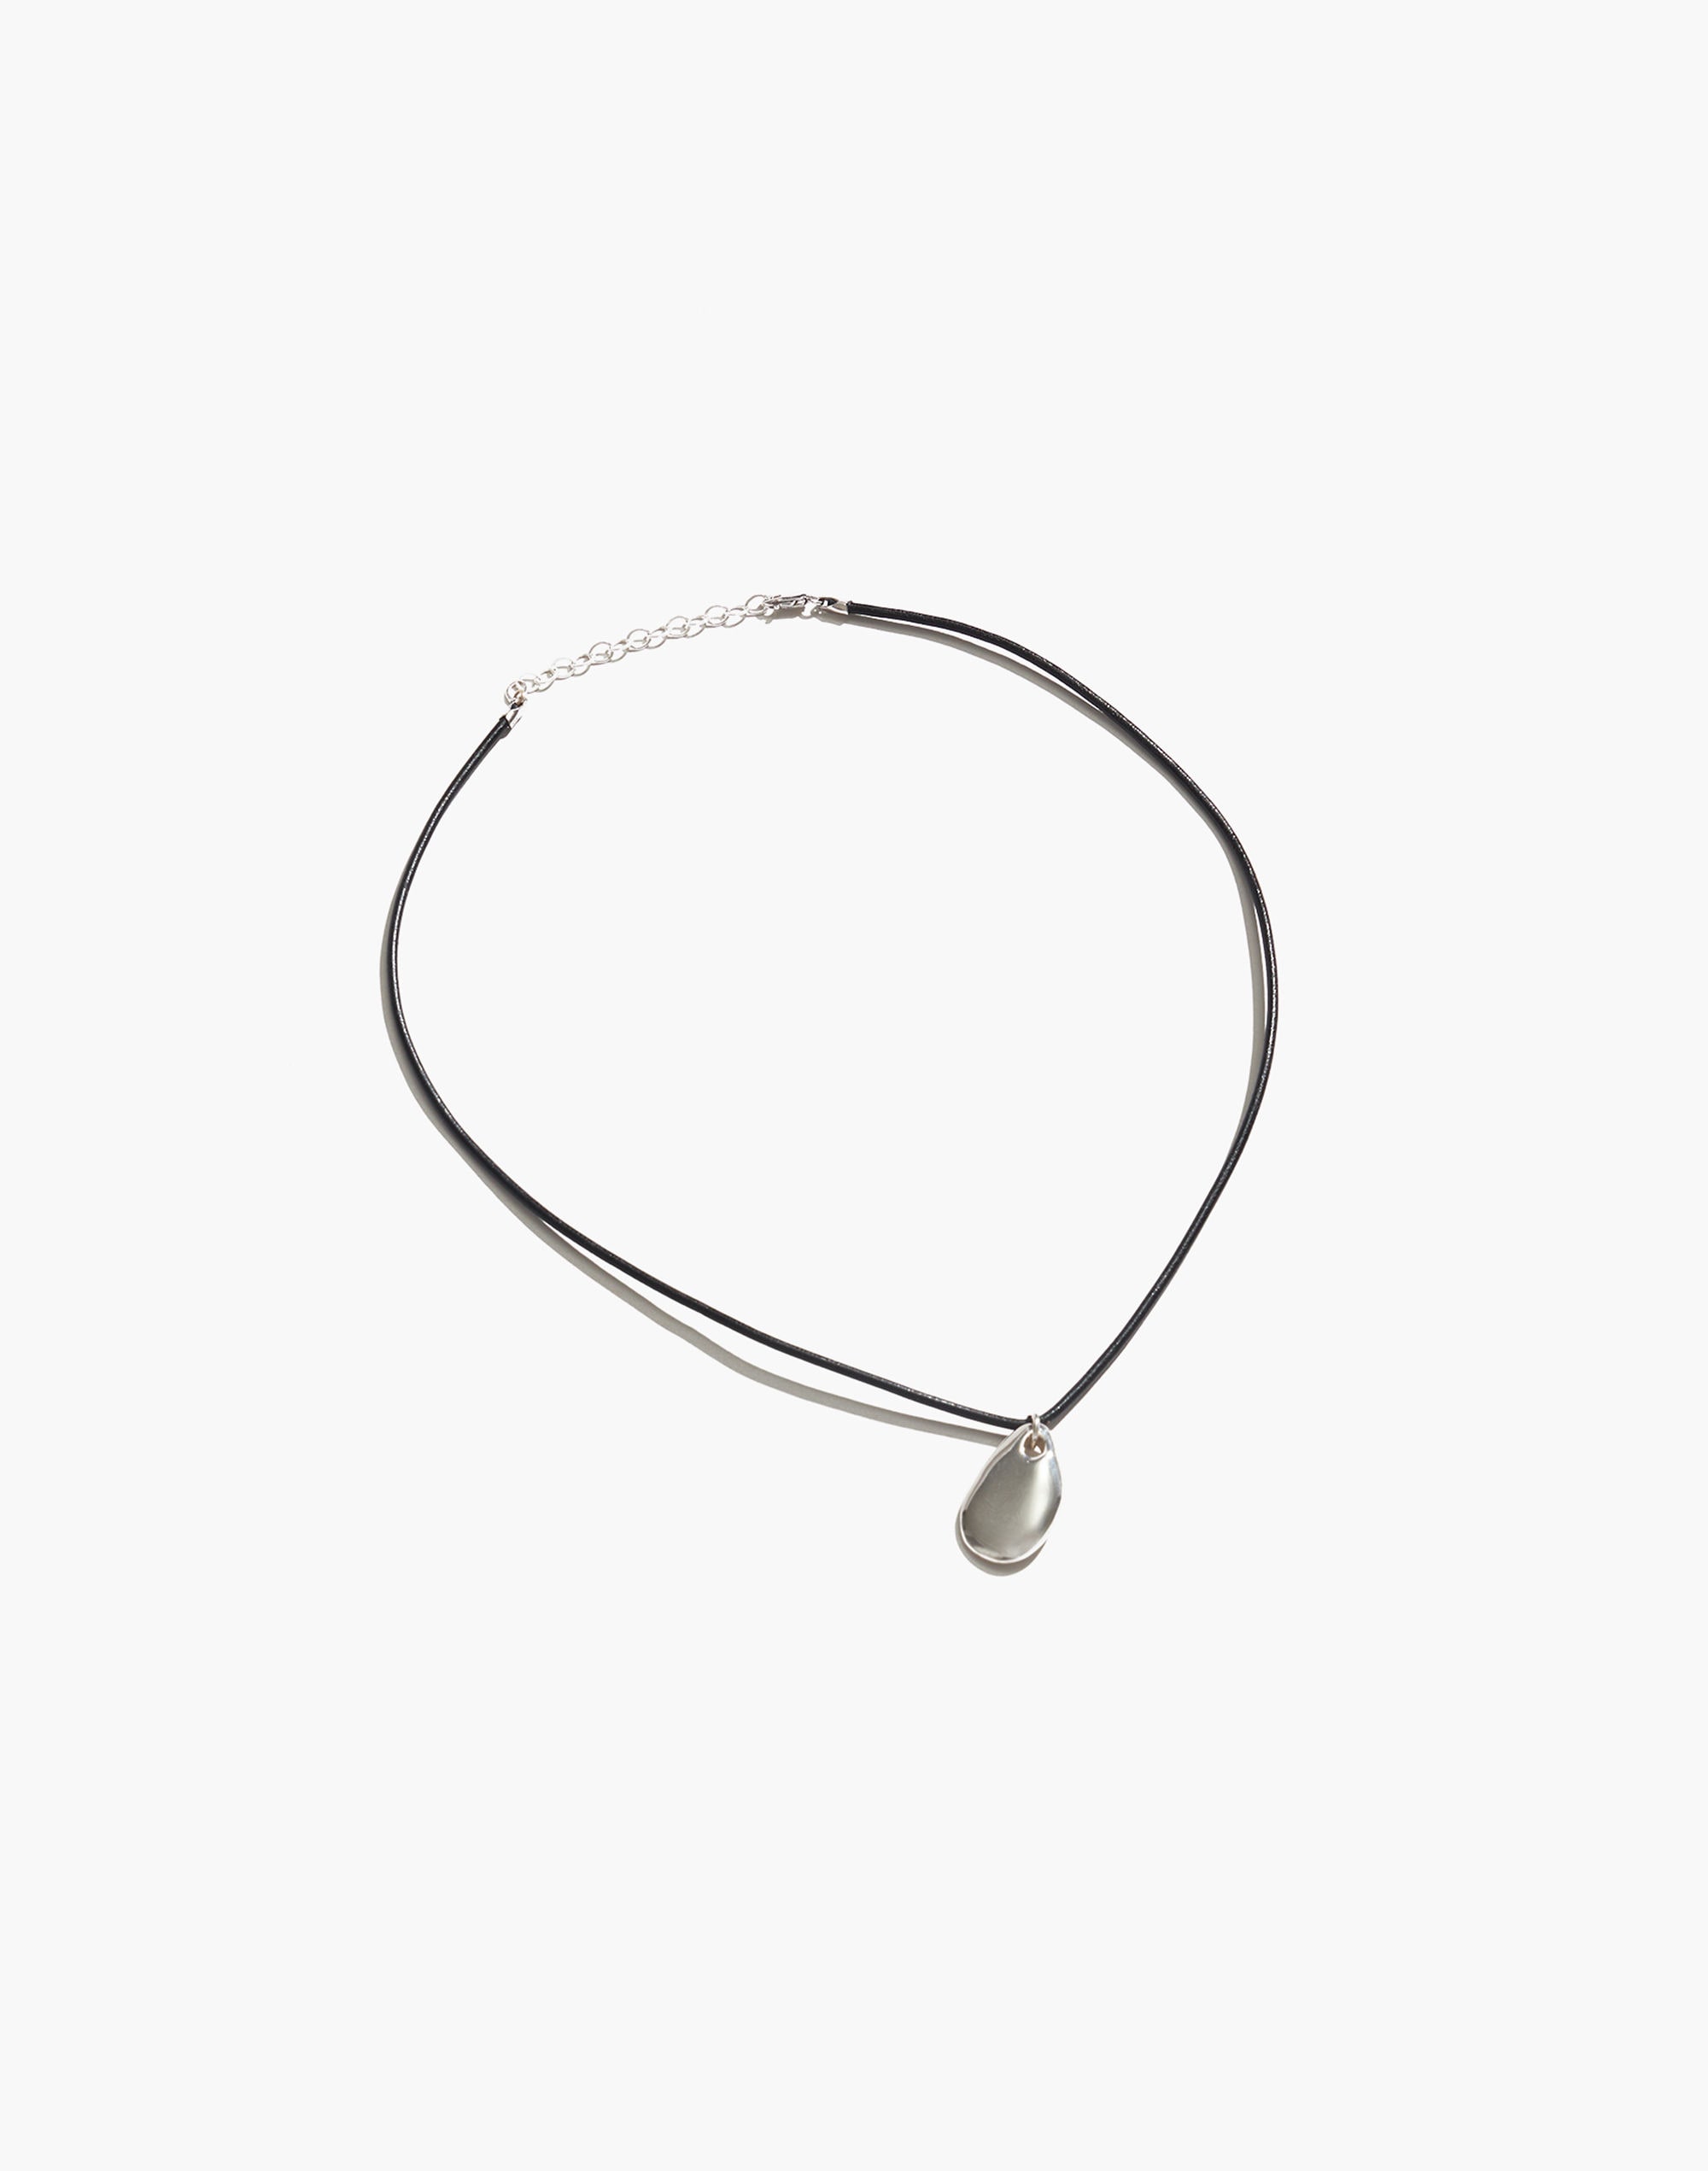 Maslo Jewelry Small Pebble Pendant Necklace Sterling Silver Cord